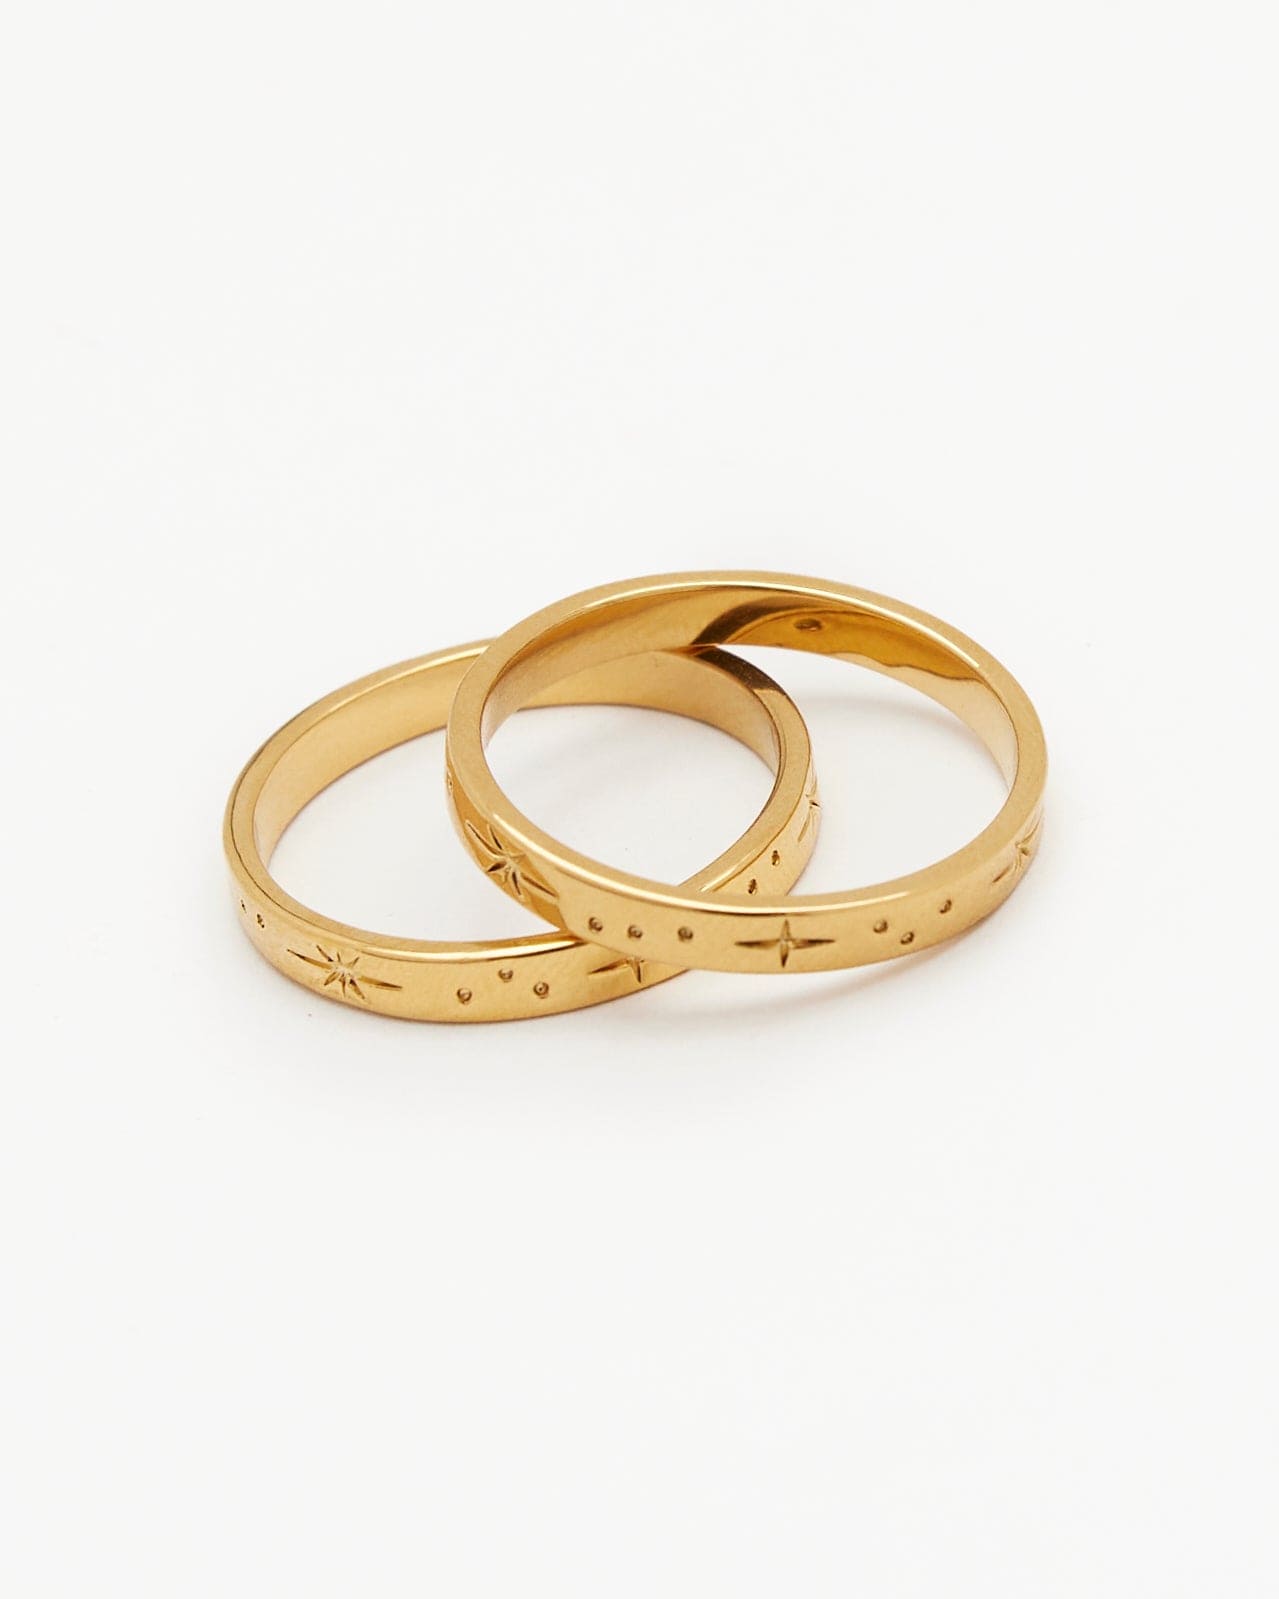 Two gold rings with constellations on them